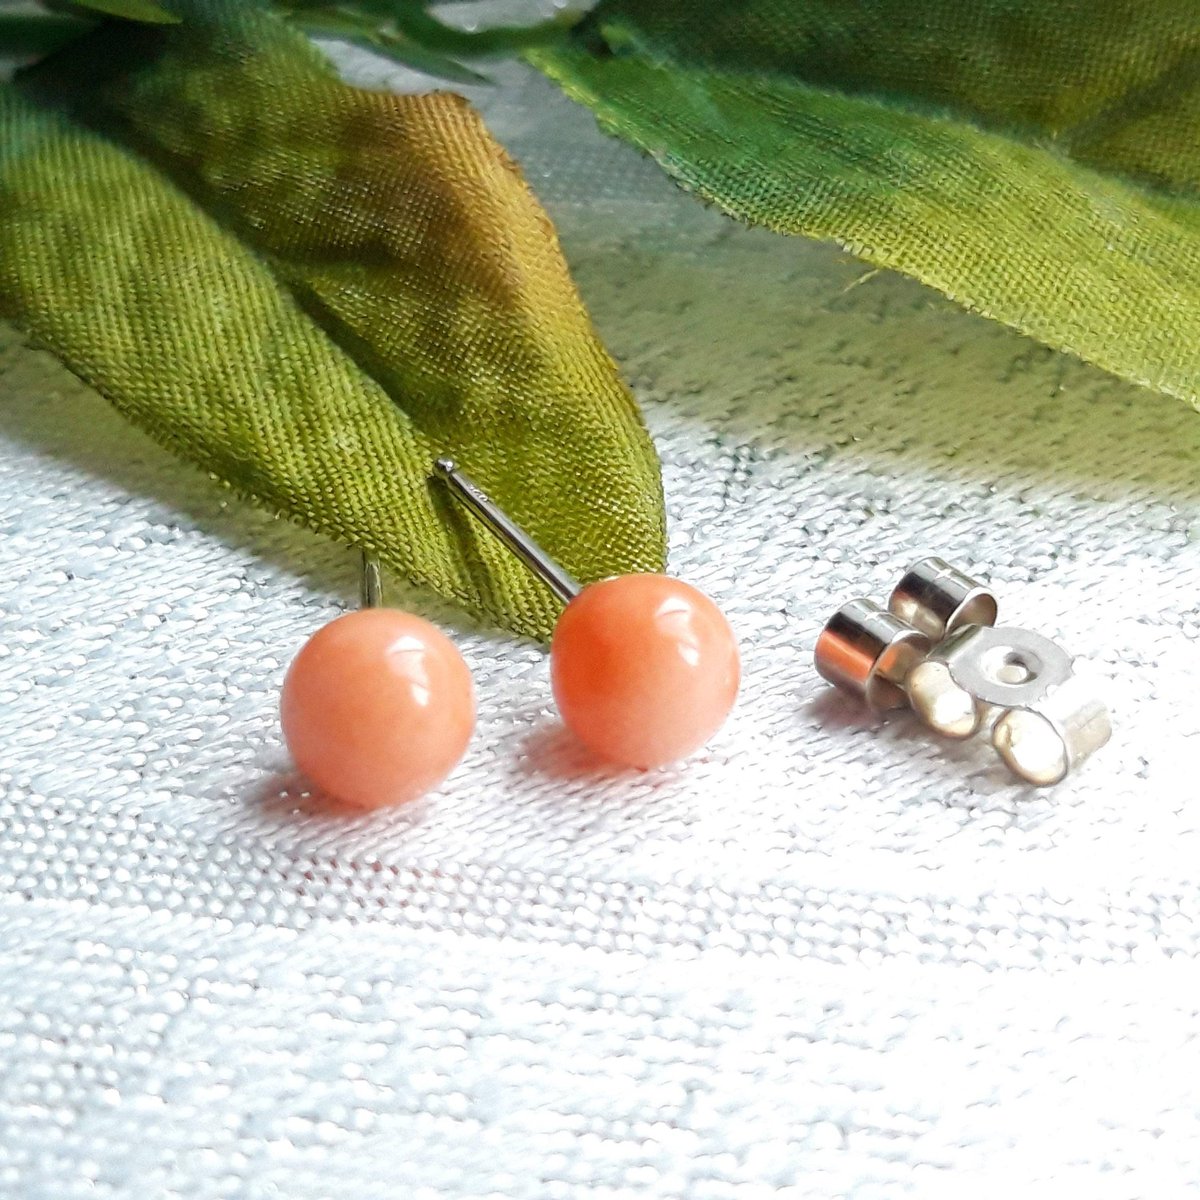 Such a pretty colour. Sterling Silver Coral Round Ball Stud Earrings etsy.me/2OSmz9P #etsy #giftideas #earrings #coral #coralearrings #earlybiz